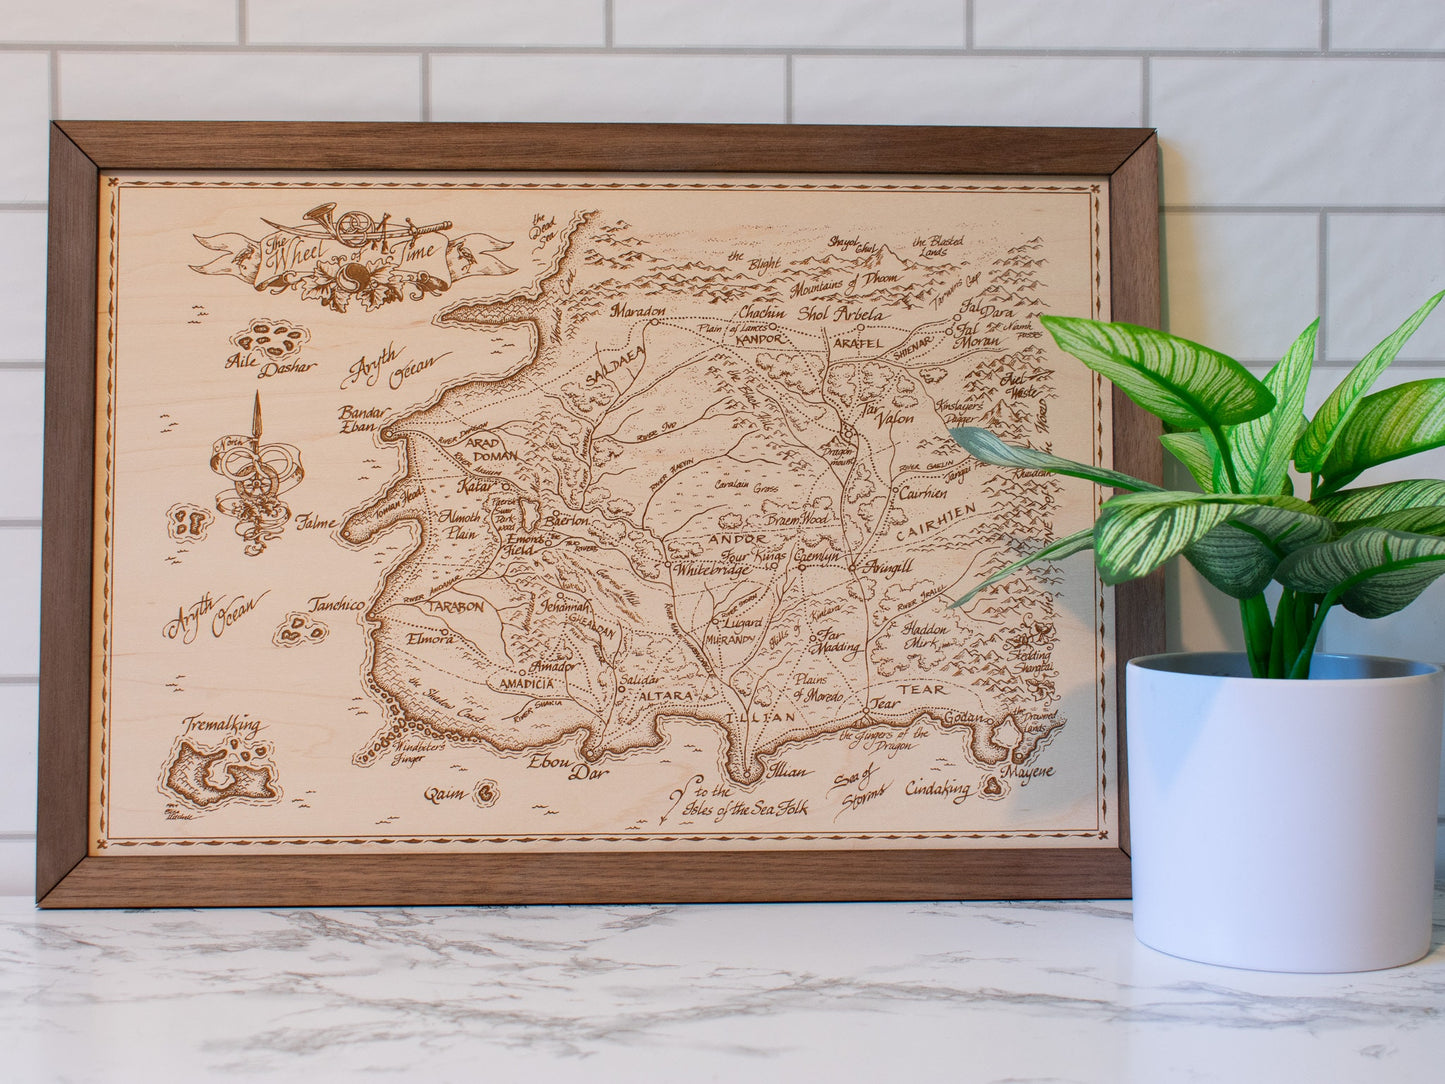 Large wood engraved map from The Wheel of Time series